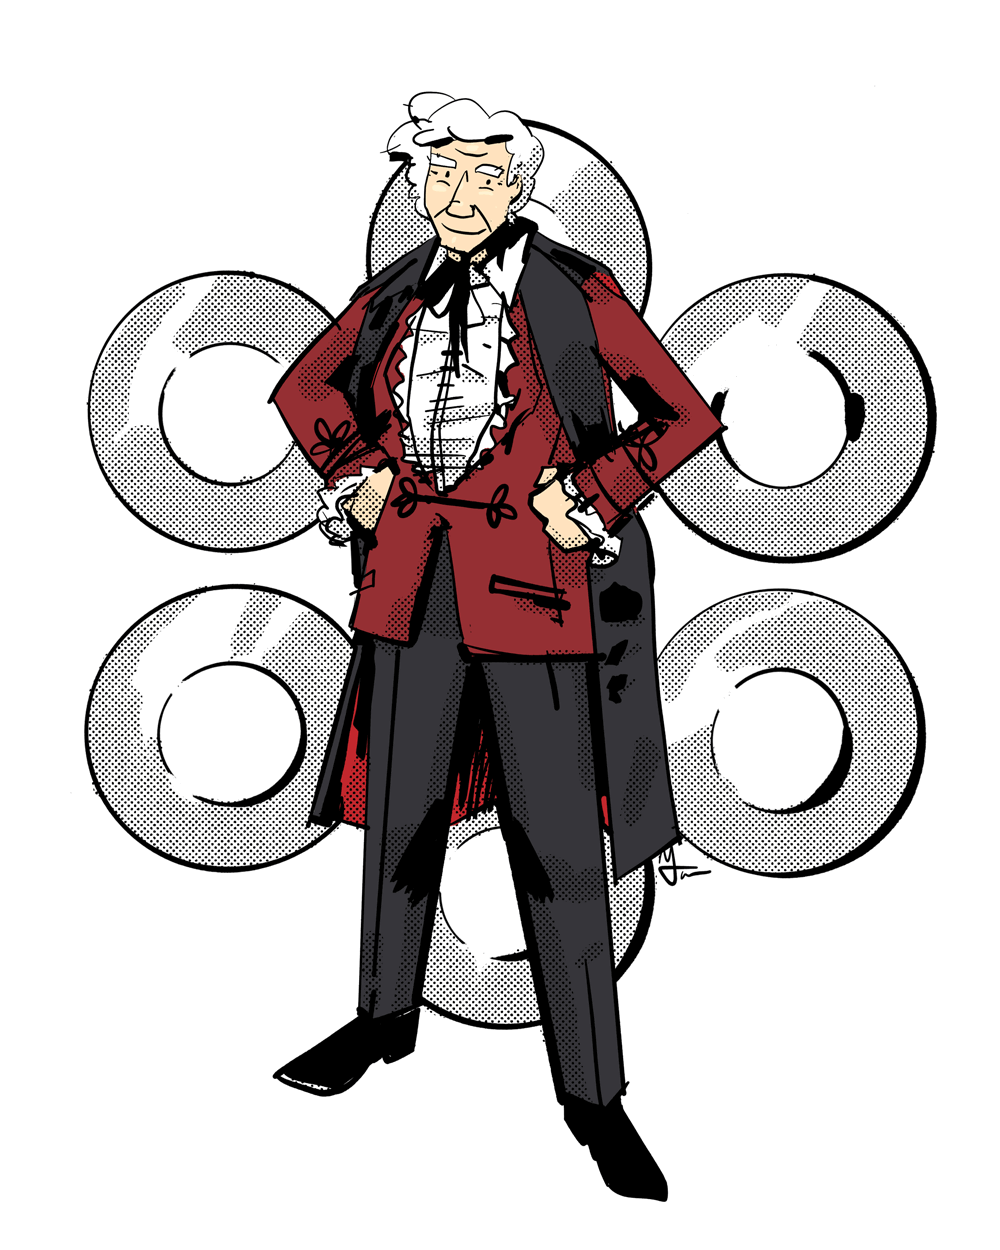 The Third Doctor Who, standing with hands on his hips. He has white curly hair and is wearing a red velvet jacket and a black cape.